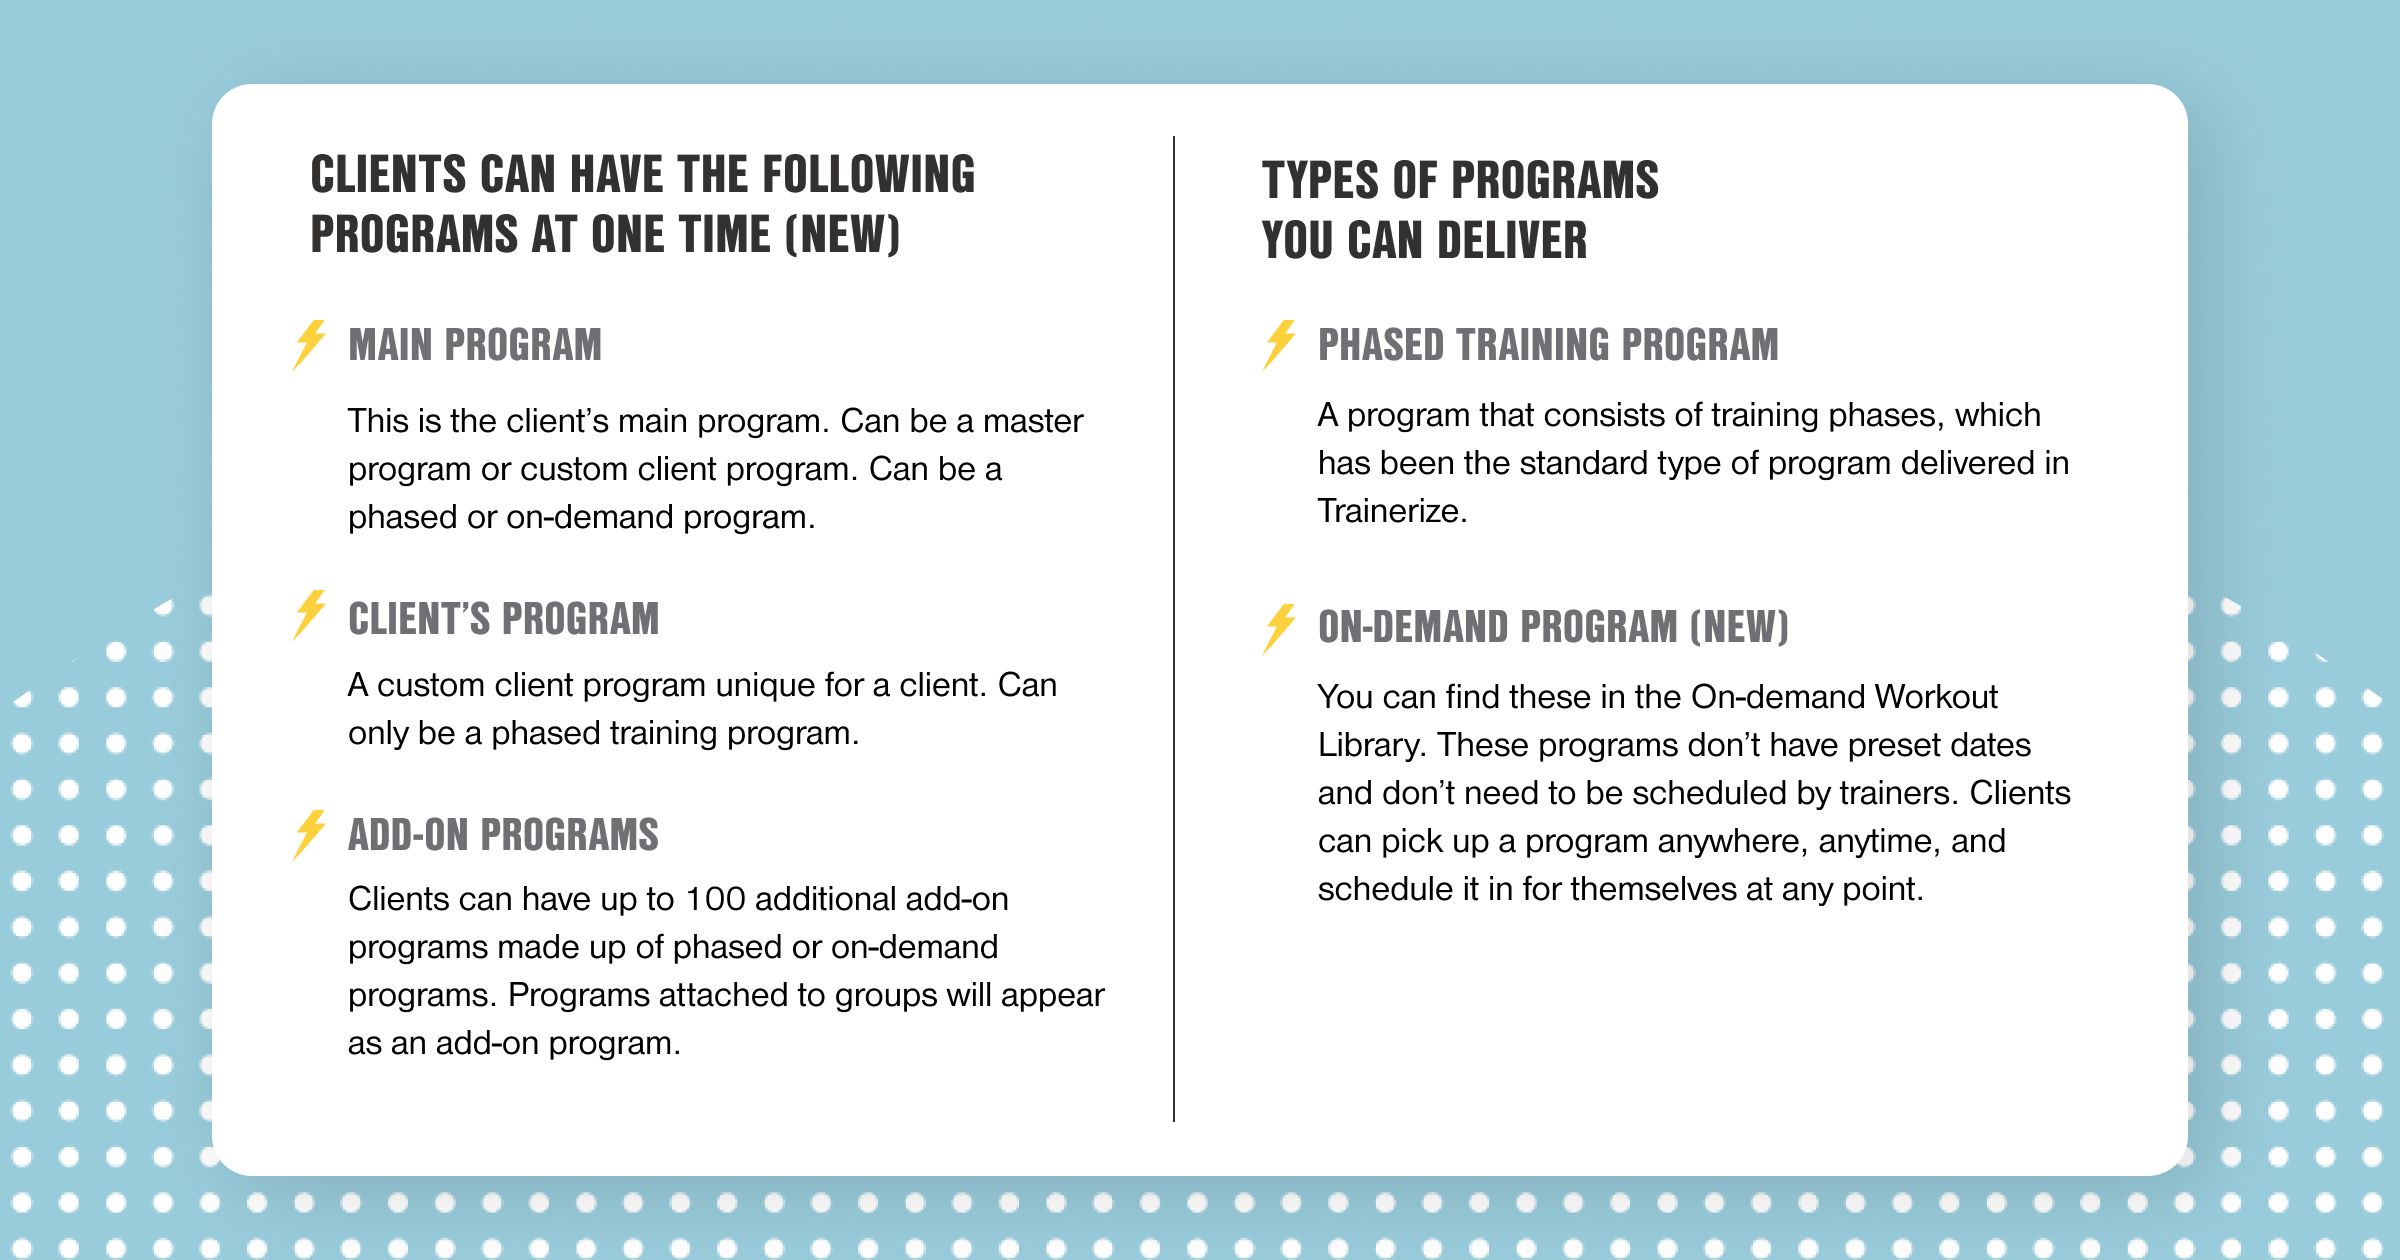 NEW! Clients can have the following programs at one time: • Main Program - This is the client's main Program. Can be a master program or custom client program. Can be a phased or on-demand program. • Client's Program - A custom client program unique for a client. Can only be a phased training program. • Add-on Programs - Clients can have up to 100 additional add-on programs made up of phased or on-demand programs. Programs attached to groups will appear as an add-on program. TYPES OF PROGRAMS YOU CAN DELIVER: • Phased Training Program - A program that consists of training phases, which has been the standard type of program delivered in Trainerize. • NEW! On-demand Program - You can find these in the On-demand Workout Library. These programs don't have preset dates and don't need to be schedule by trainers. Clients can pick up a program anywhere, anytime, and schedule it in for themselves at any point.